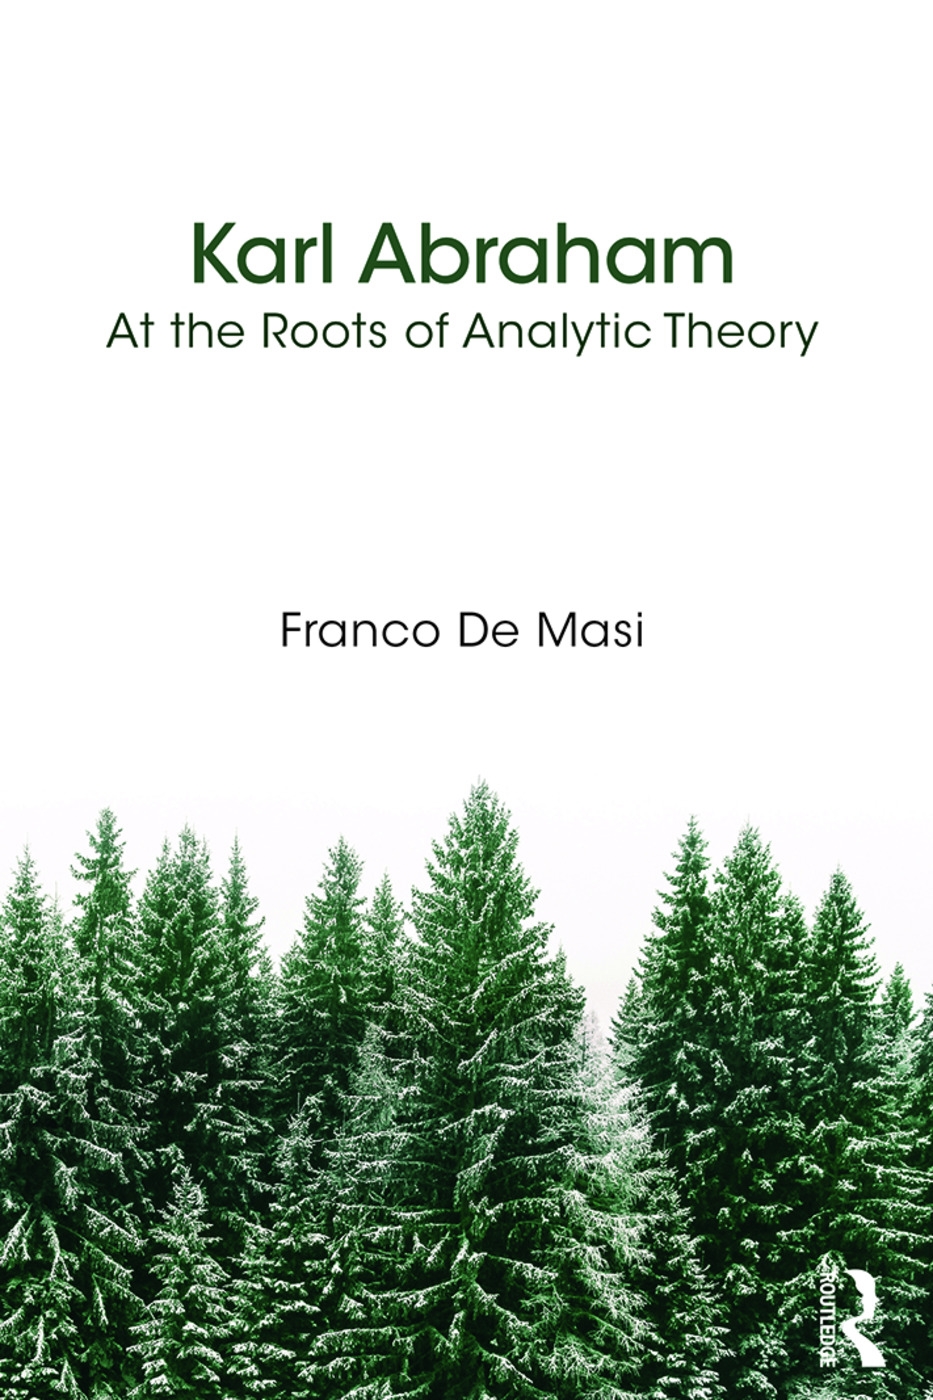 Karl Abraham: At the Roots of Analytic Theory